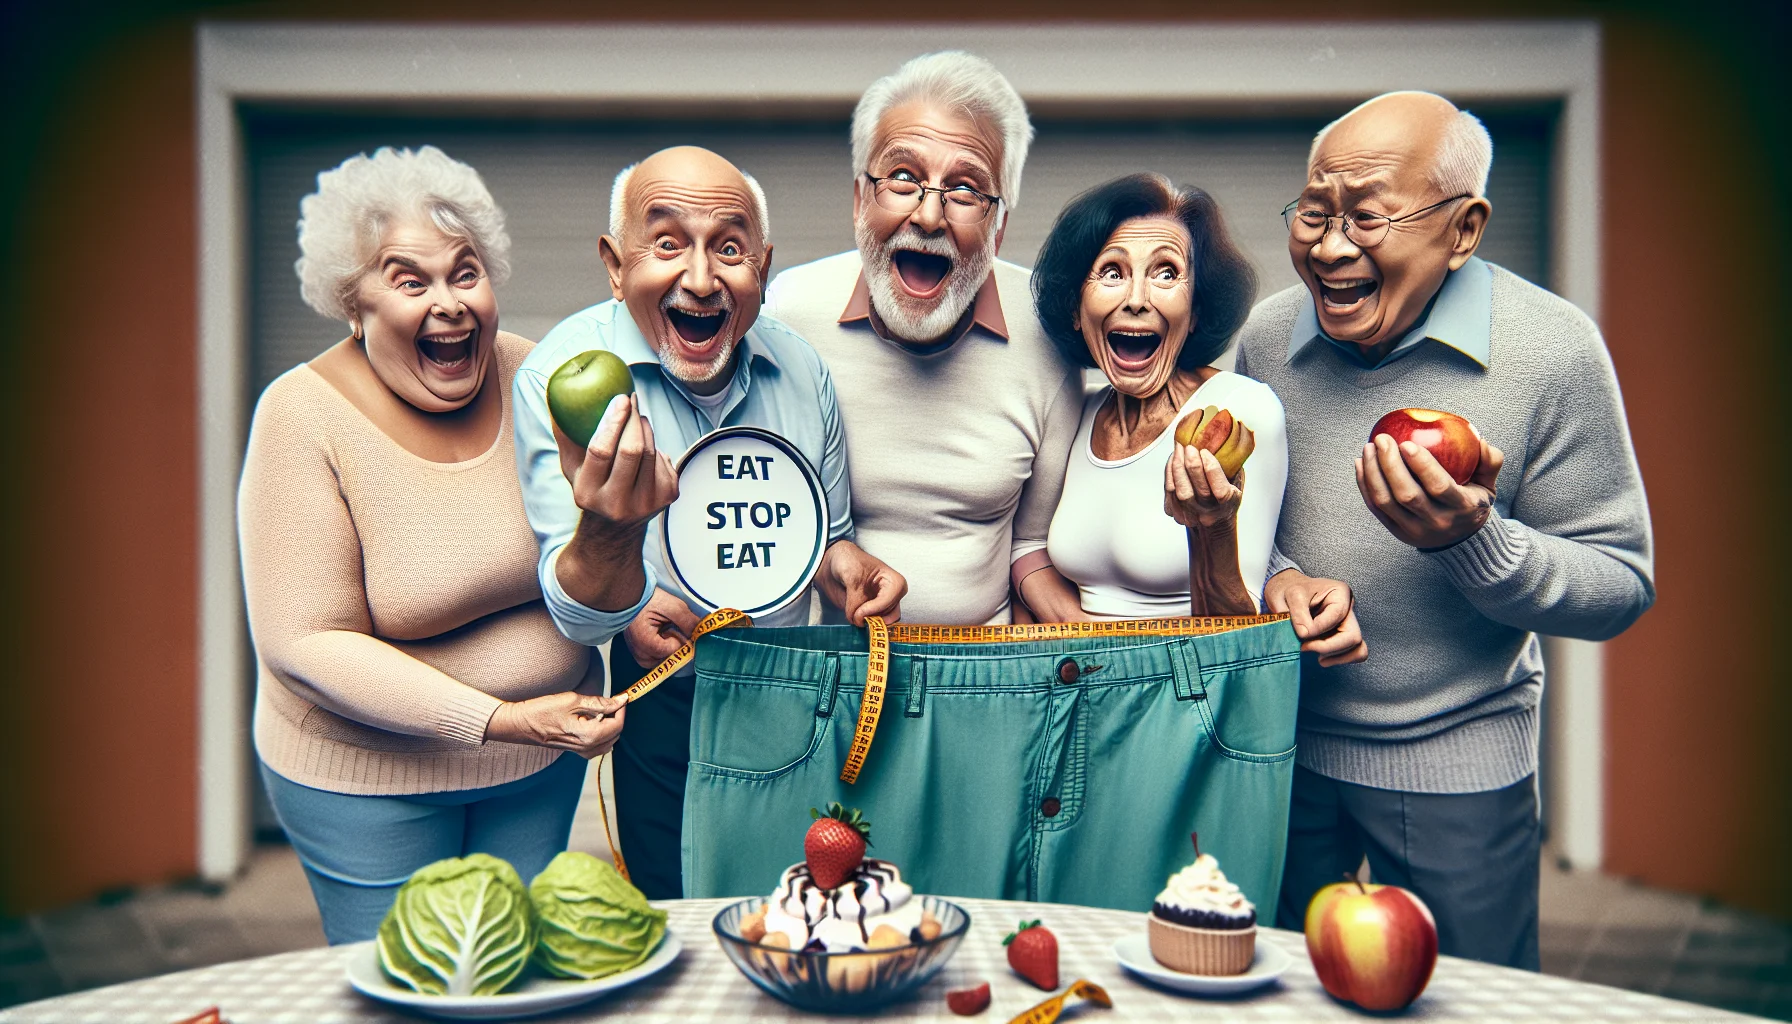 A highly amusing and realistic image of an elderly group each showcasing their 'eat stop eat' diet results. The group includes a Caucasian woman jovially waving a portions-measured plate, a Hispanic man humorously holding up his previously worn larger trousers, a Black woman laughing while holding an oversized apple, and an Asian man puzzlingly looking at a tiny dessert portion. Their facial expressions should reflect their light-hearted take on dieting. Perhaps they are at a senior centre or park, somewhere they gather and interact with each other. Incorporate vibrant colors to enhance the merriment of the scene.